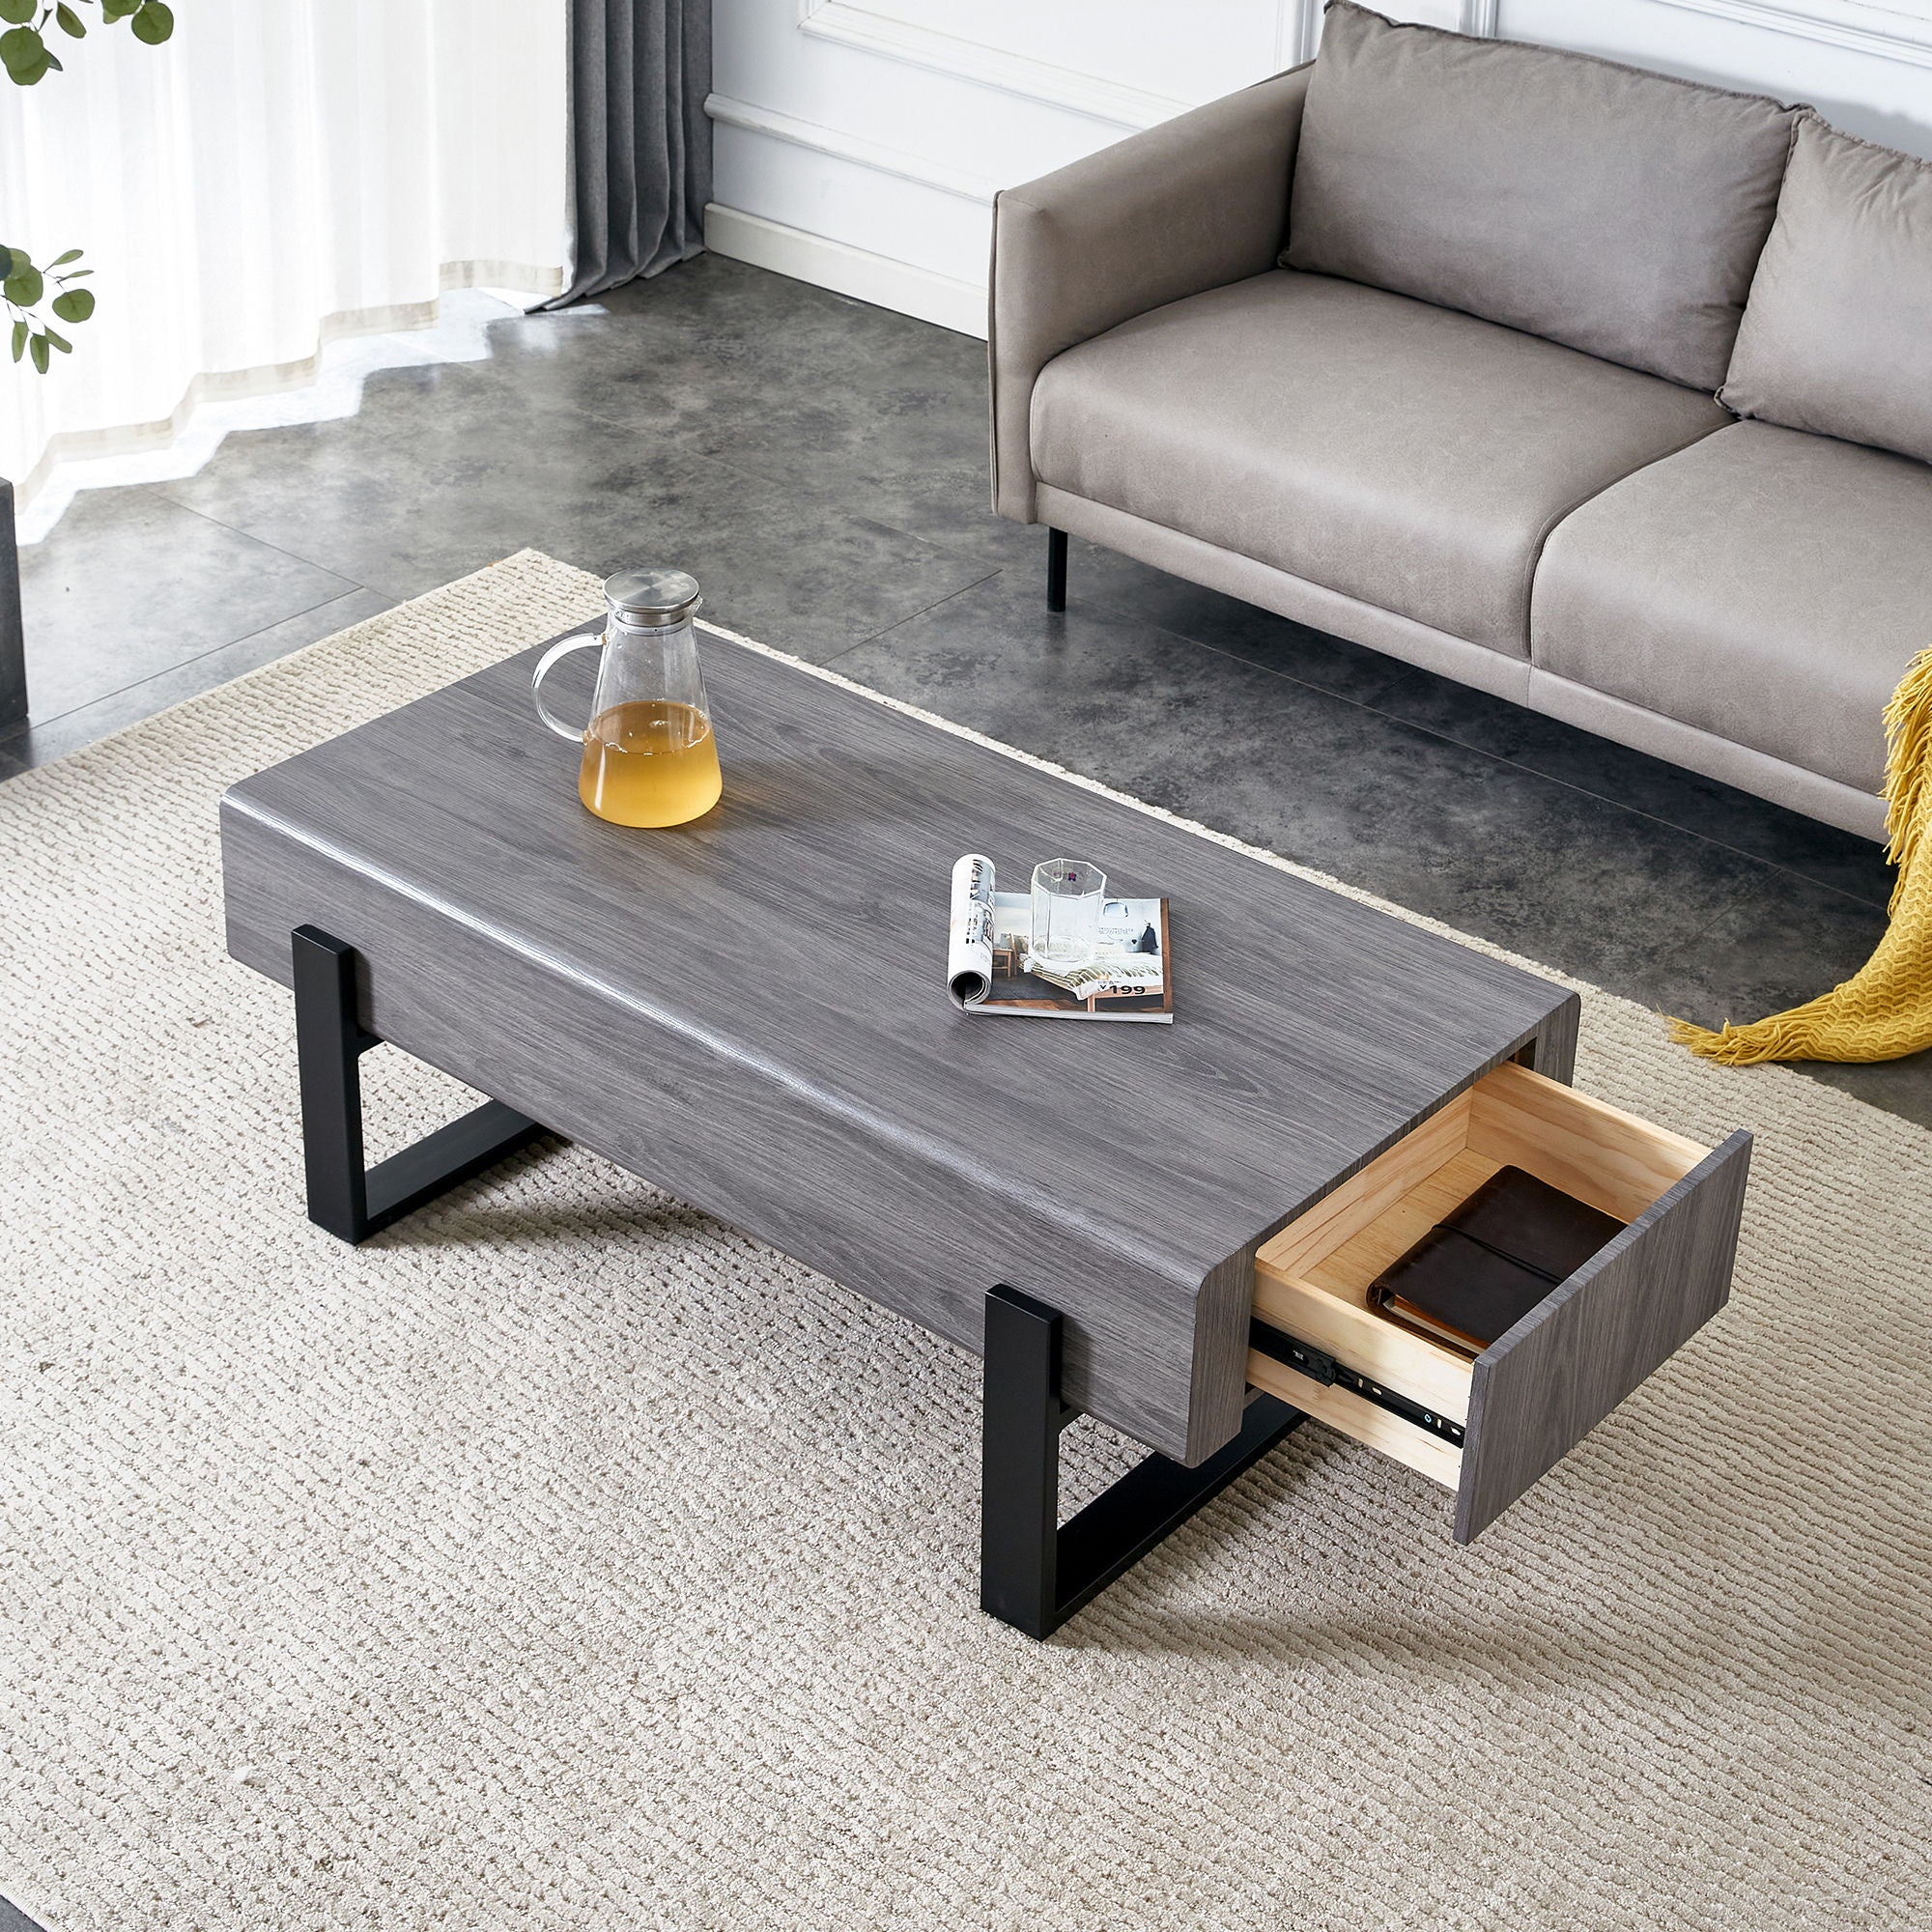 A Coffee Table Made Of MDF Material Equipped With Drawers Made Of Solid Wood Material Can Store Things And Save Space Paired With Black Metal Table Legs Suitable For Living Room